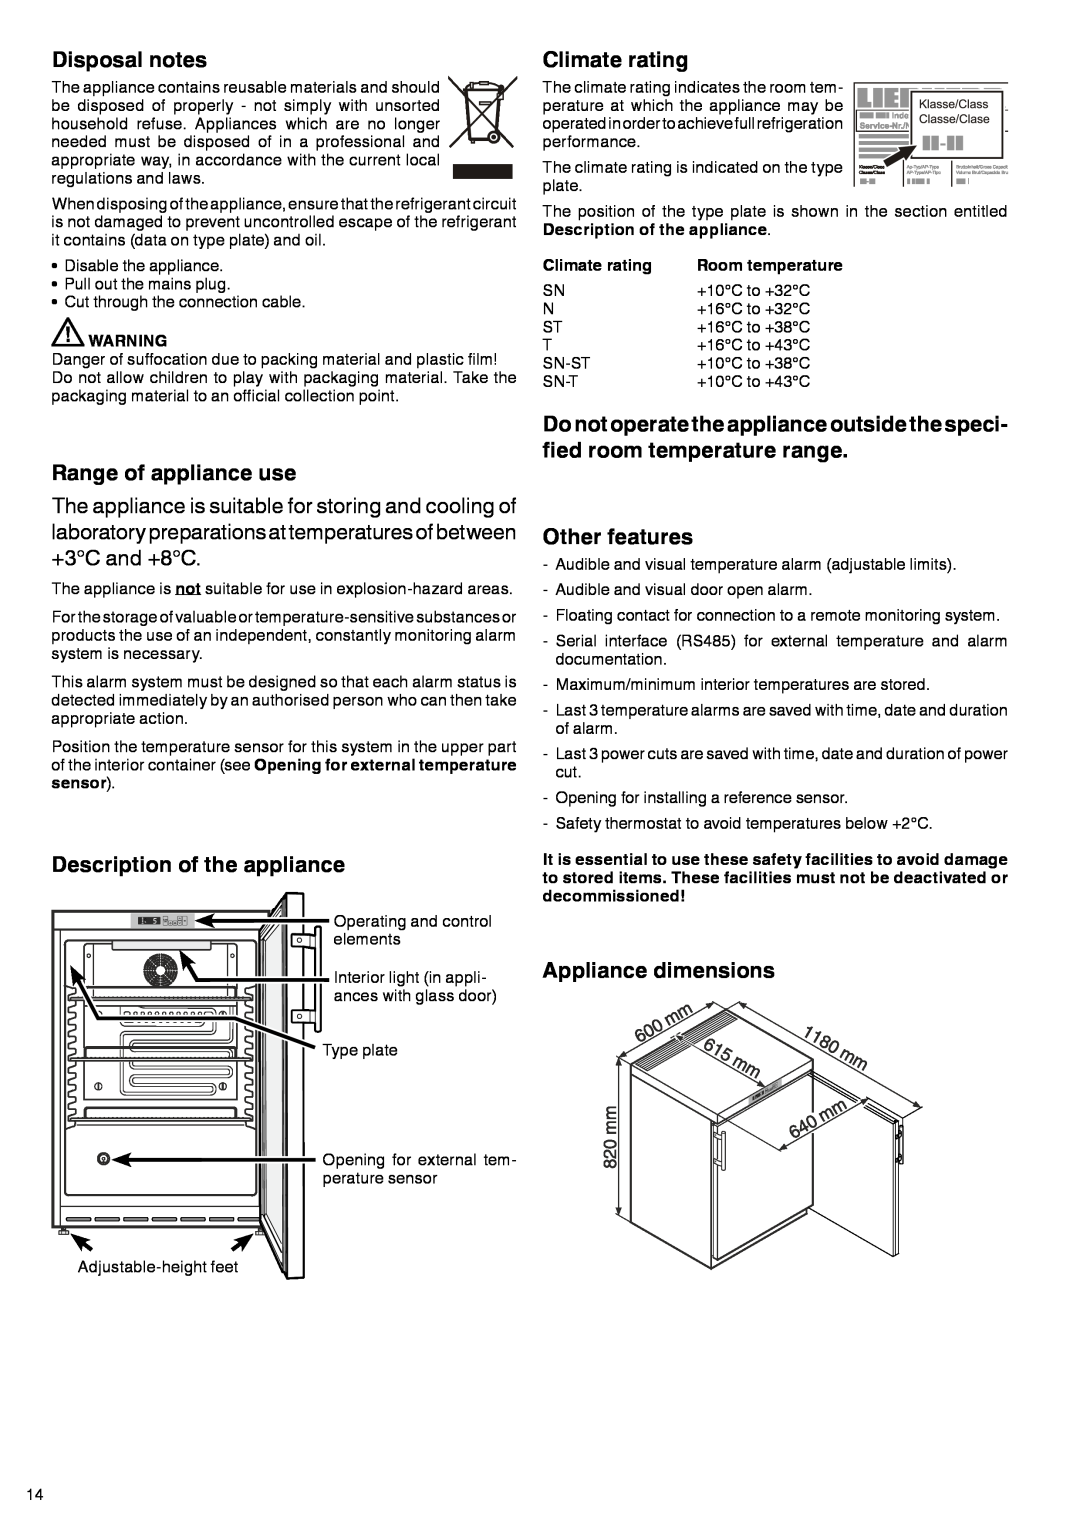 Liebherr 7083 247-00 Disposal notes, Range of appliance use, Description of the appliance, Climate rating, Other features 